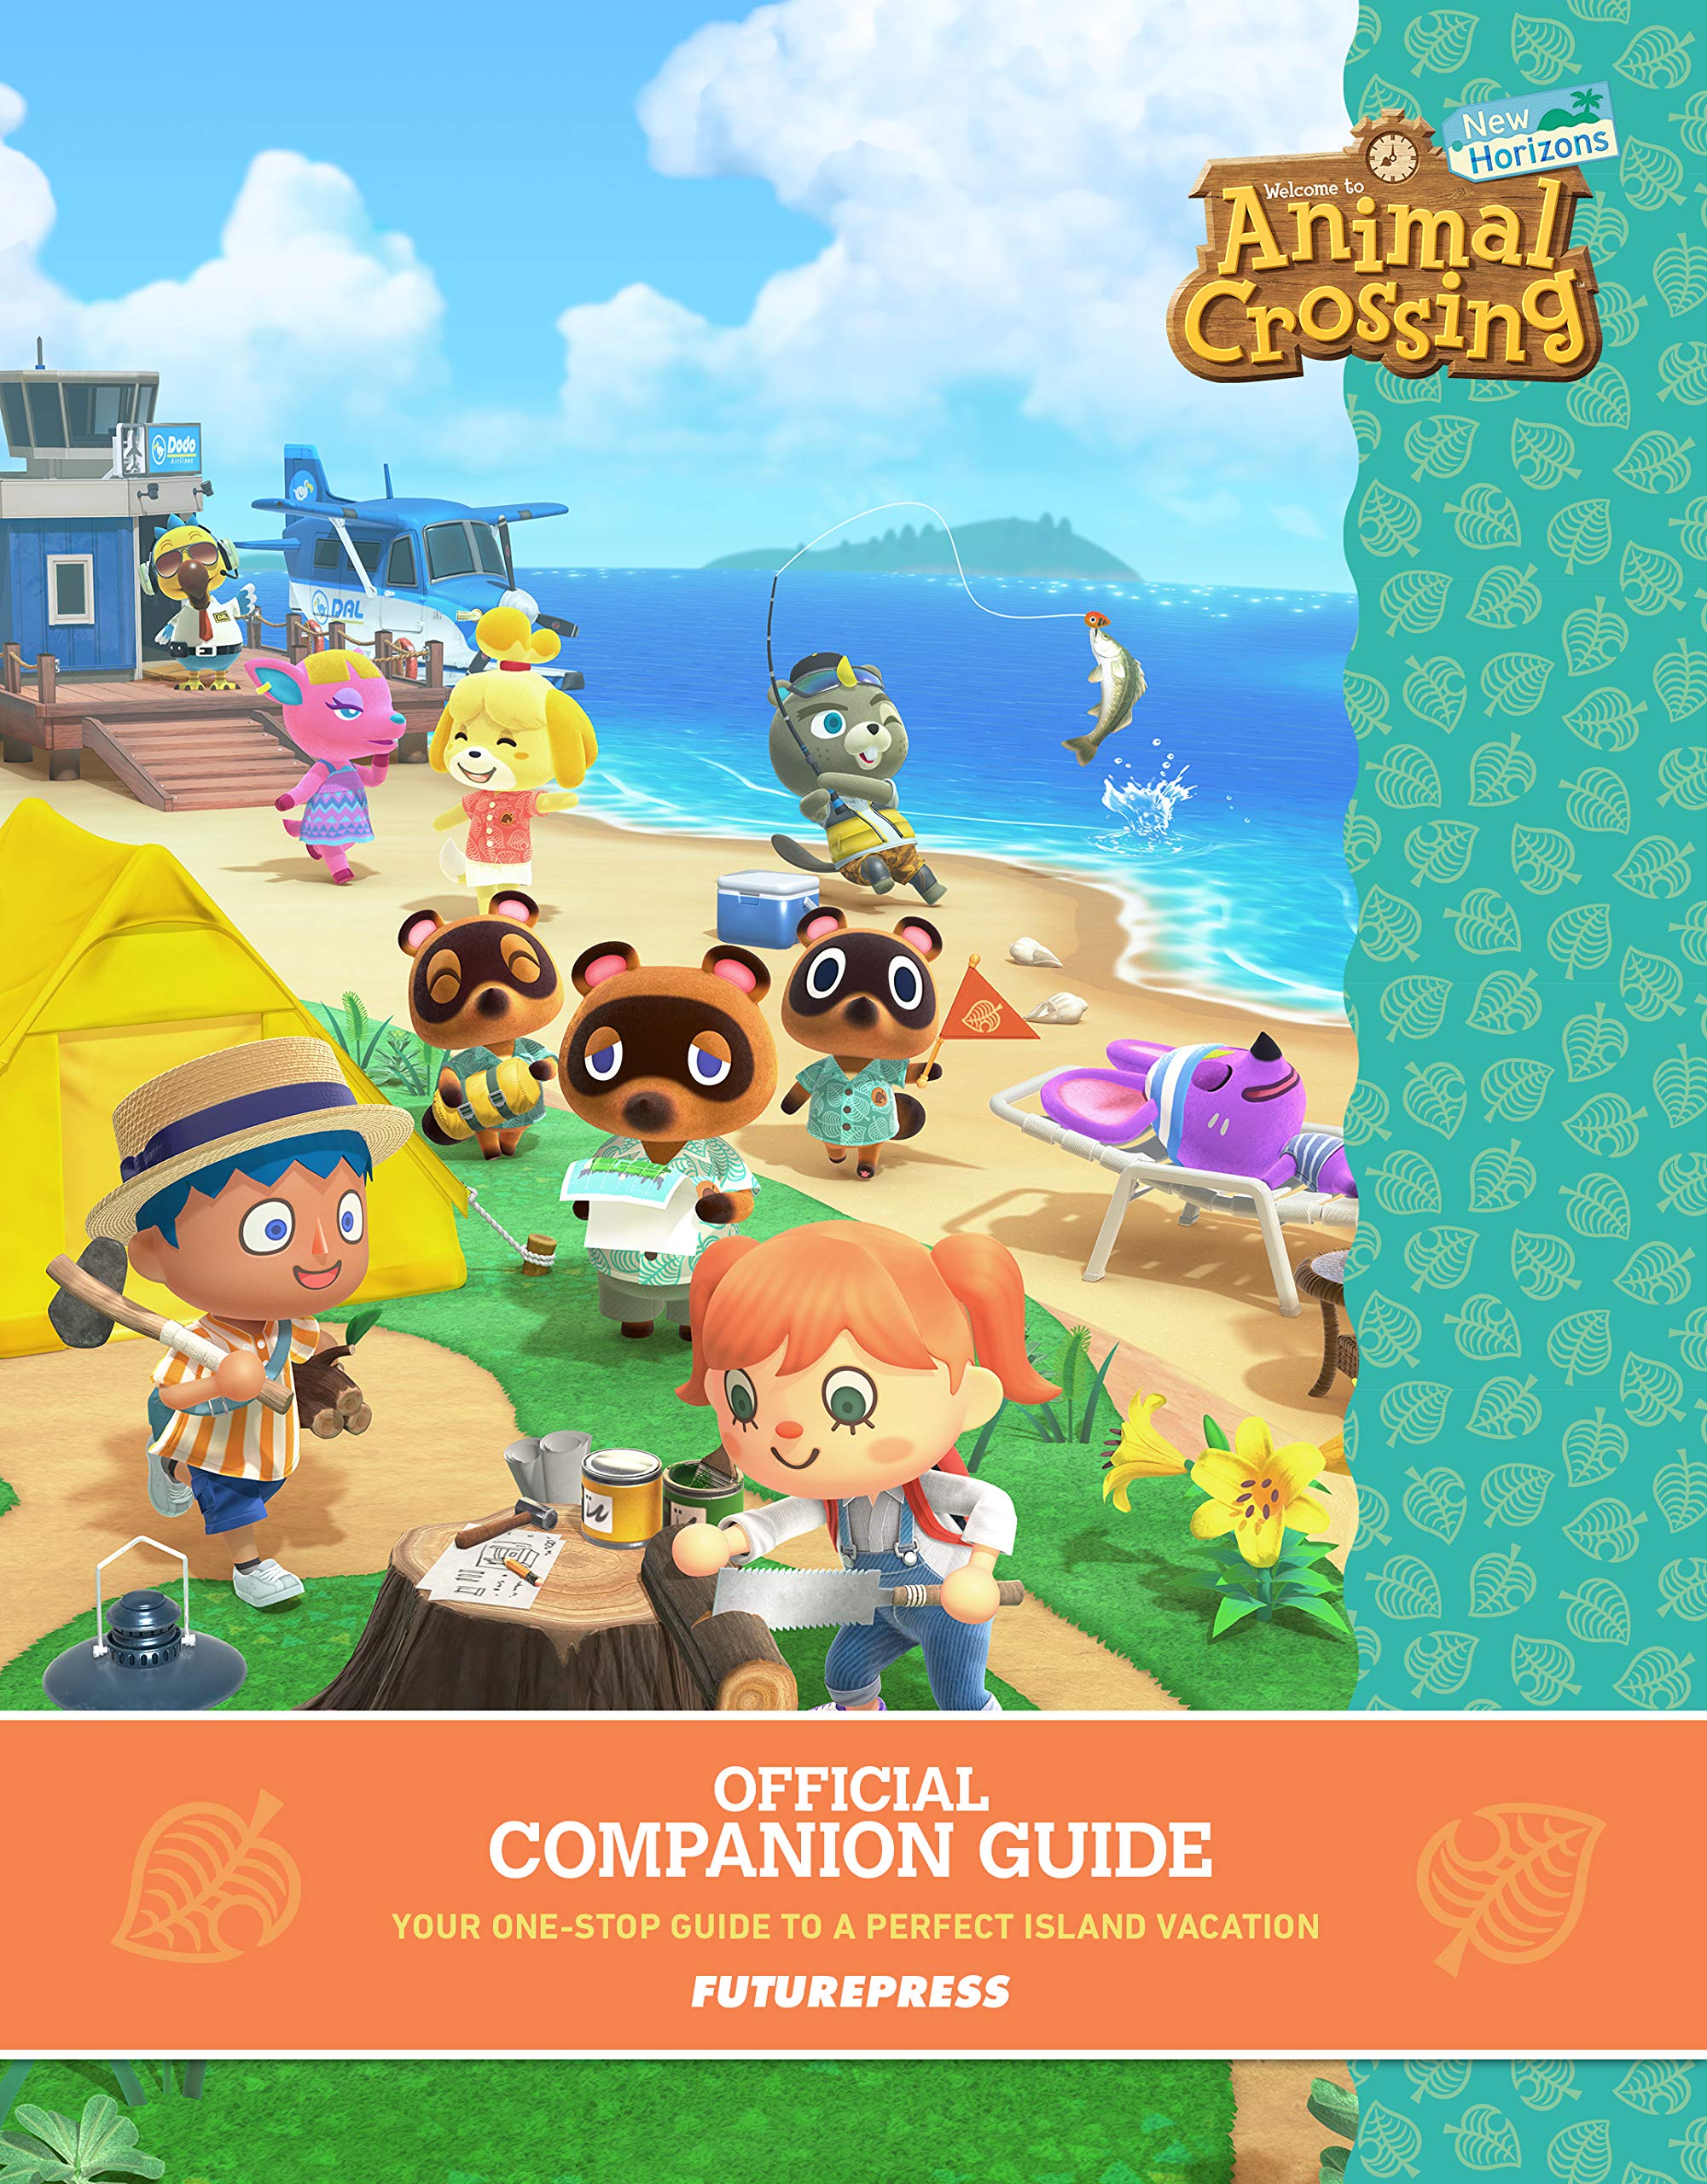 Animal Crossing New Horizons getting an official guide